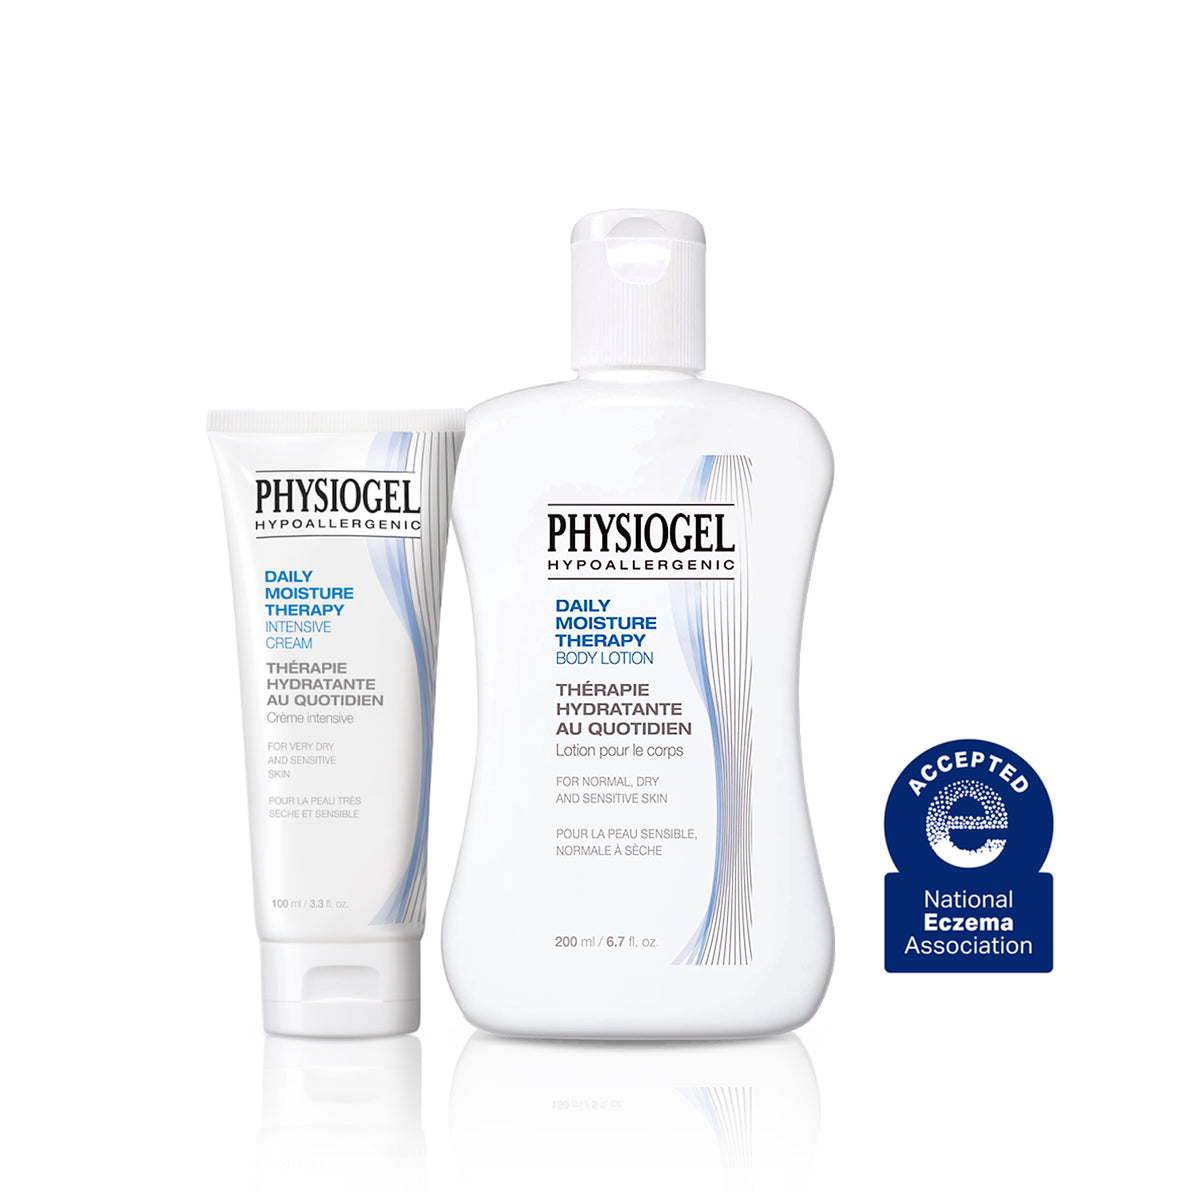 Physiogel Daily Moisture Therapy Intensive Facial Cream & Body Lotion Set